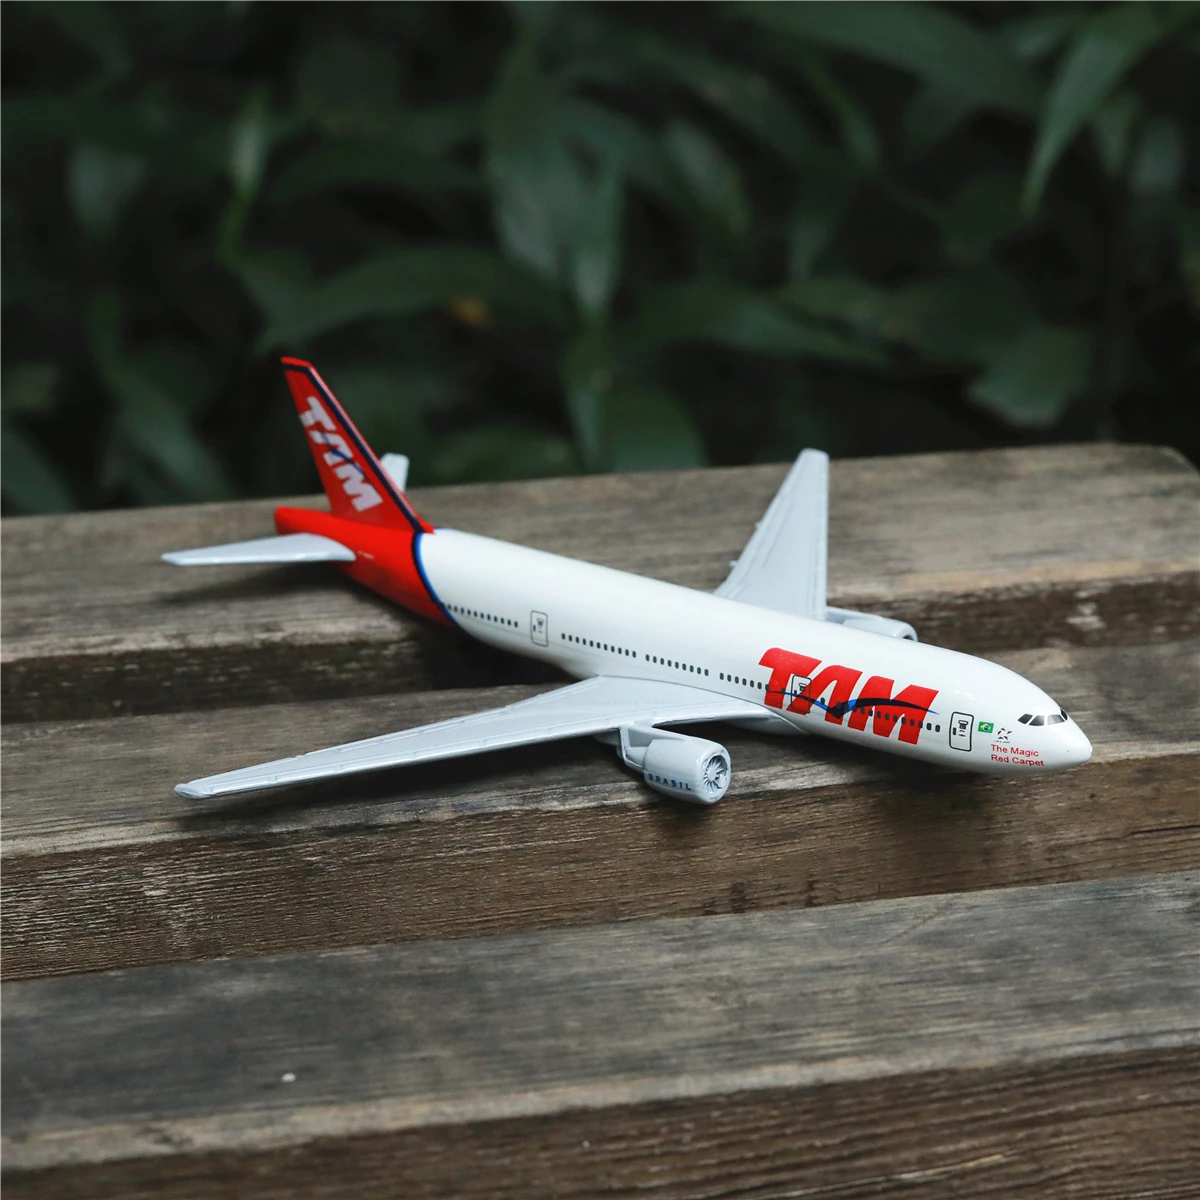 

Brazilian TAM Airlines Boeing 777 Aircraft Model 6" Metal Airplane Diecast Mini Moto Collection Eduactional Toys for Children